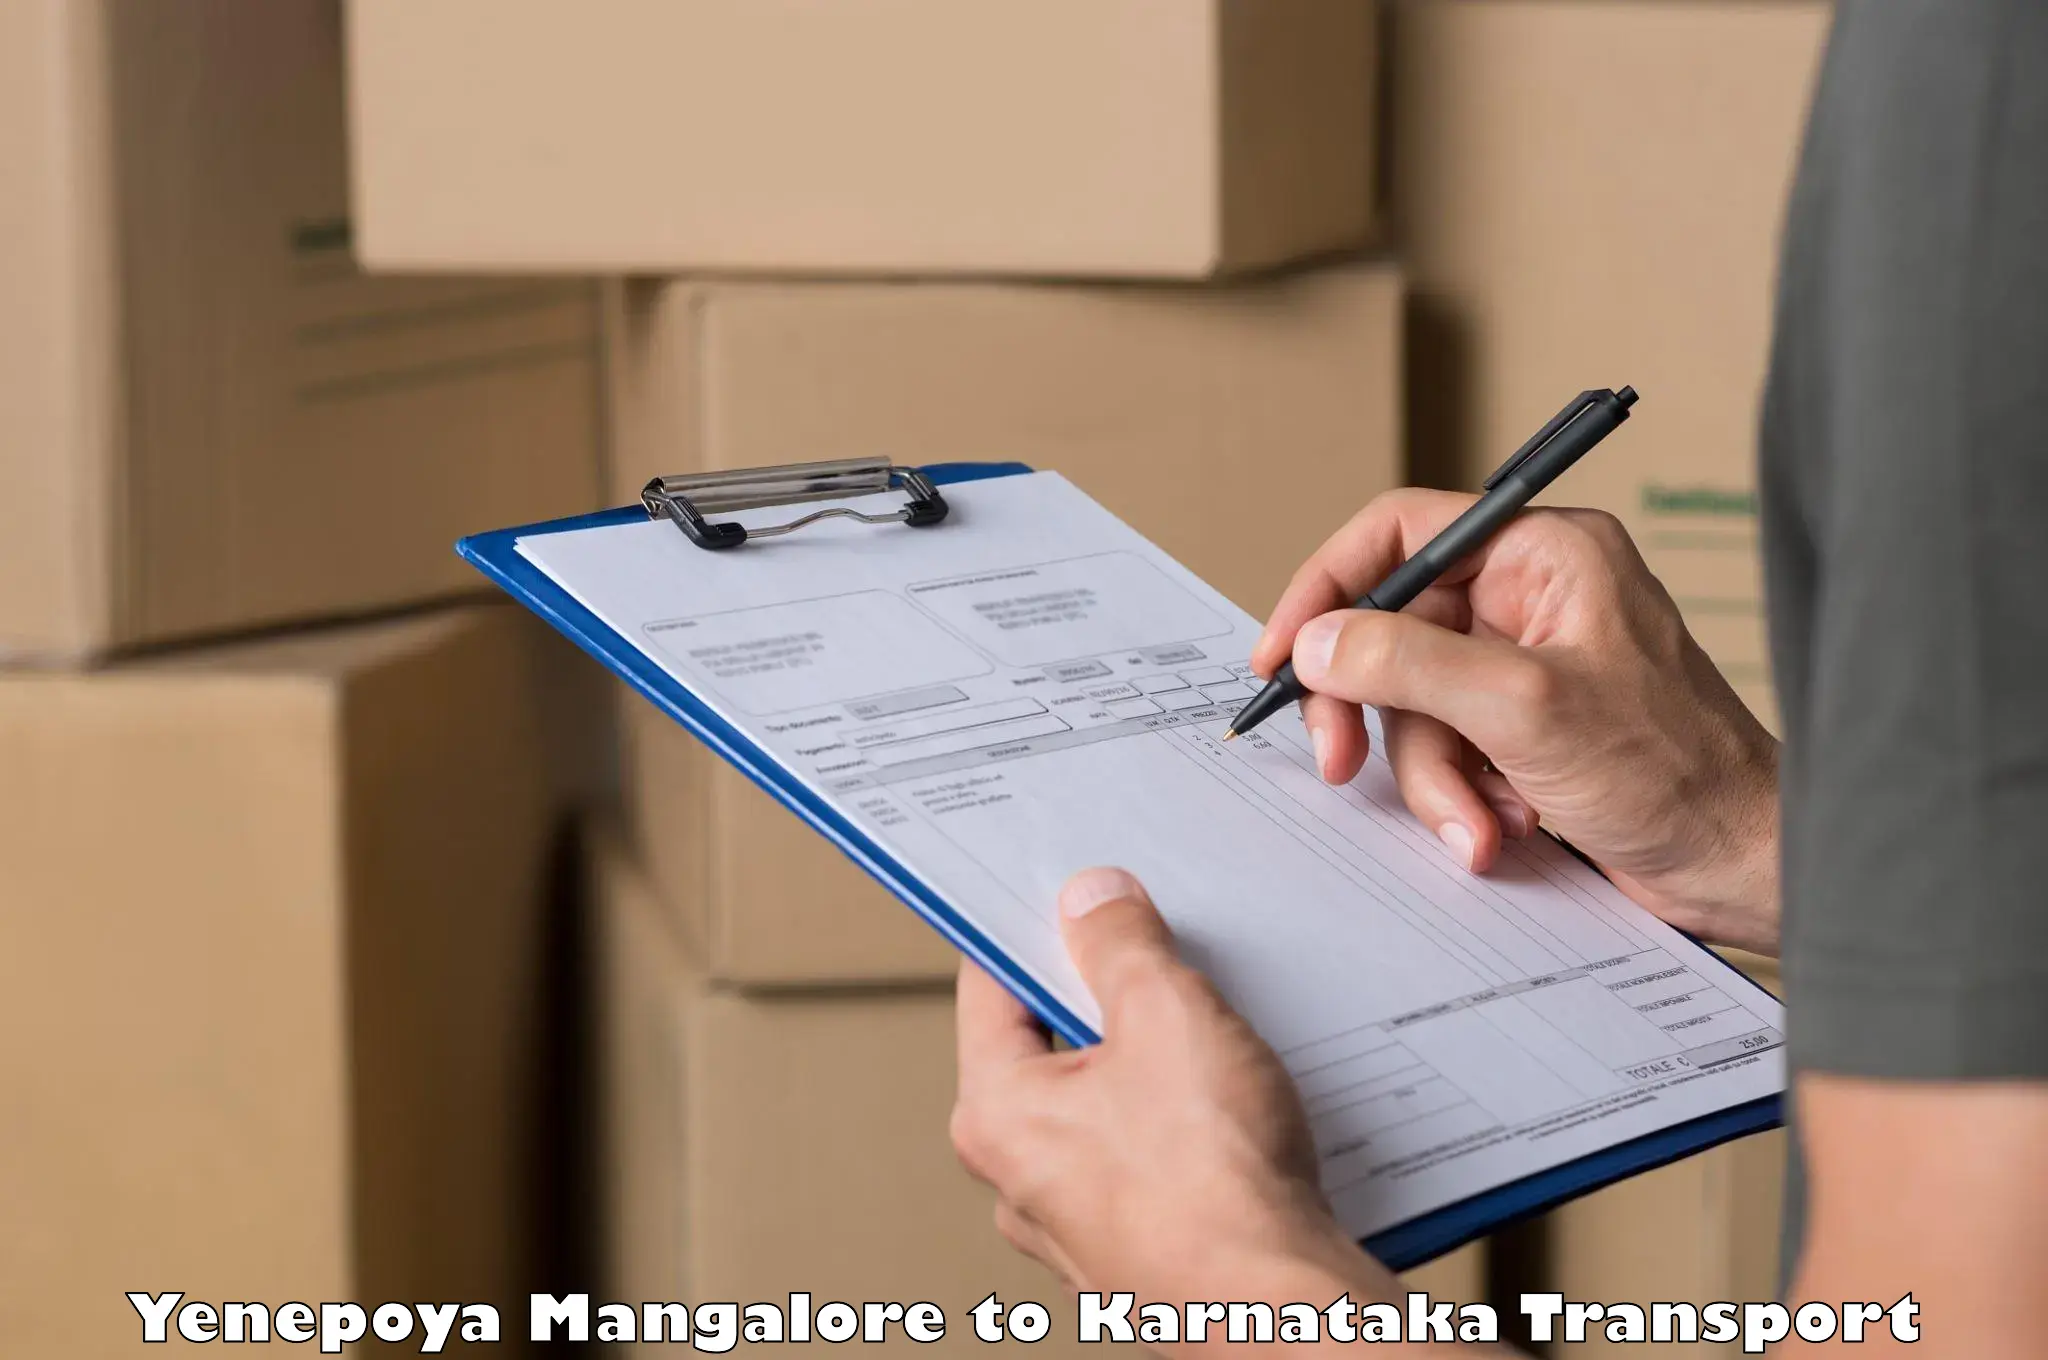 Road transport online services Yenepoya Mangalore to Mulbagal